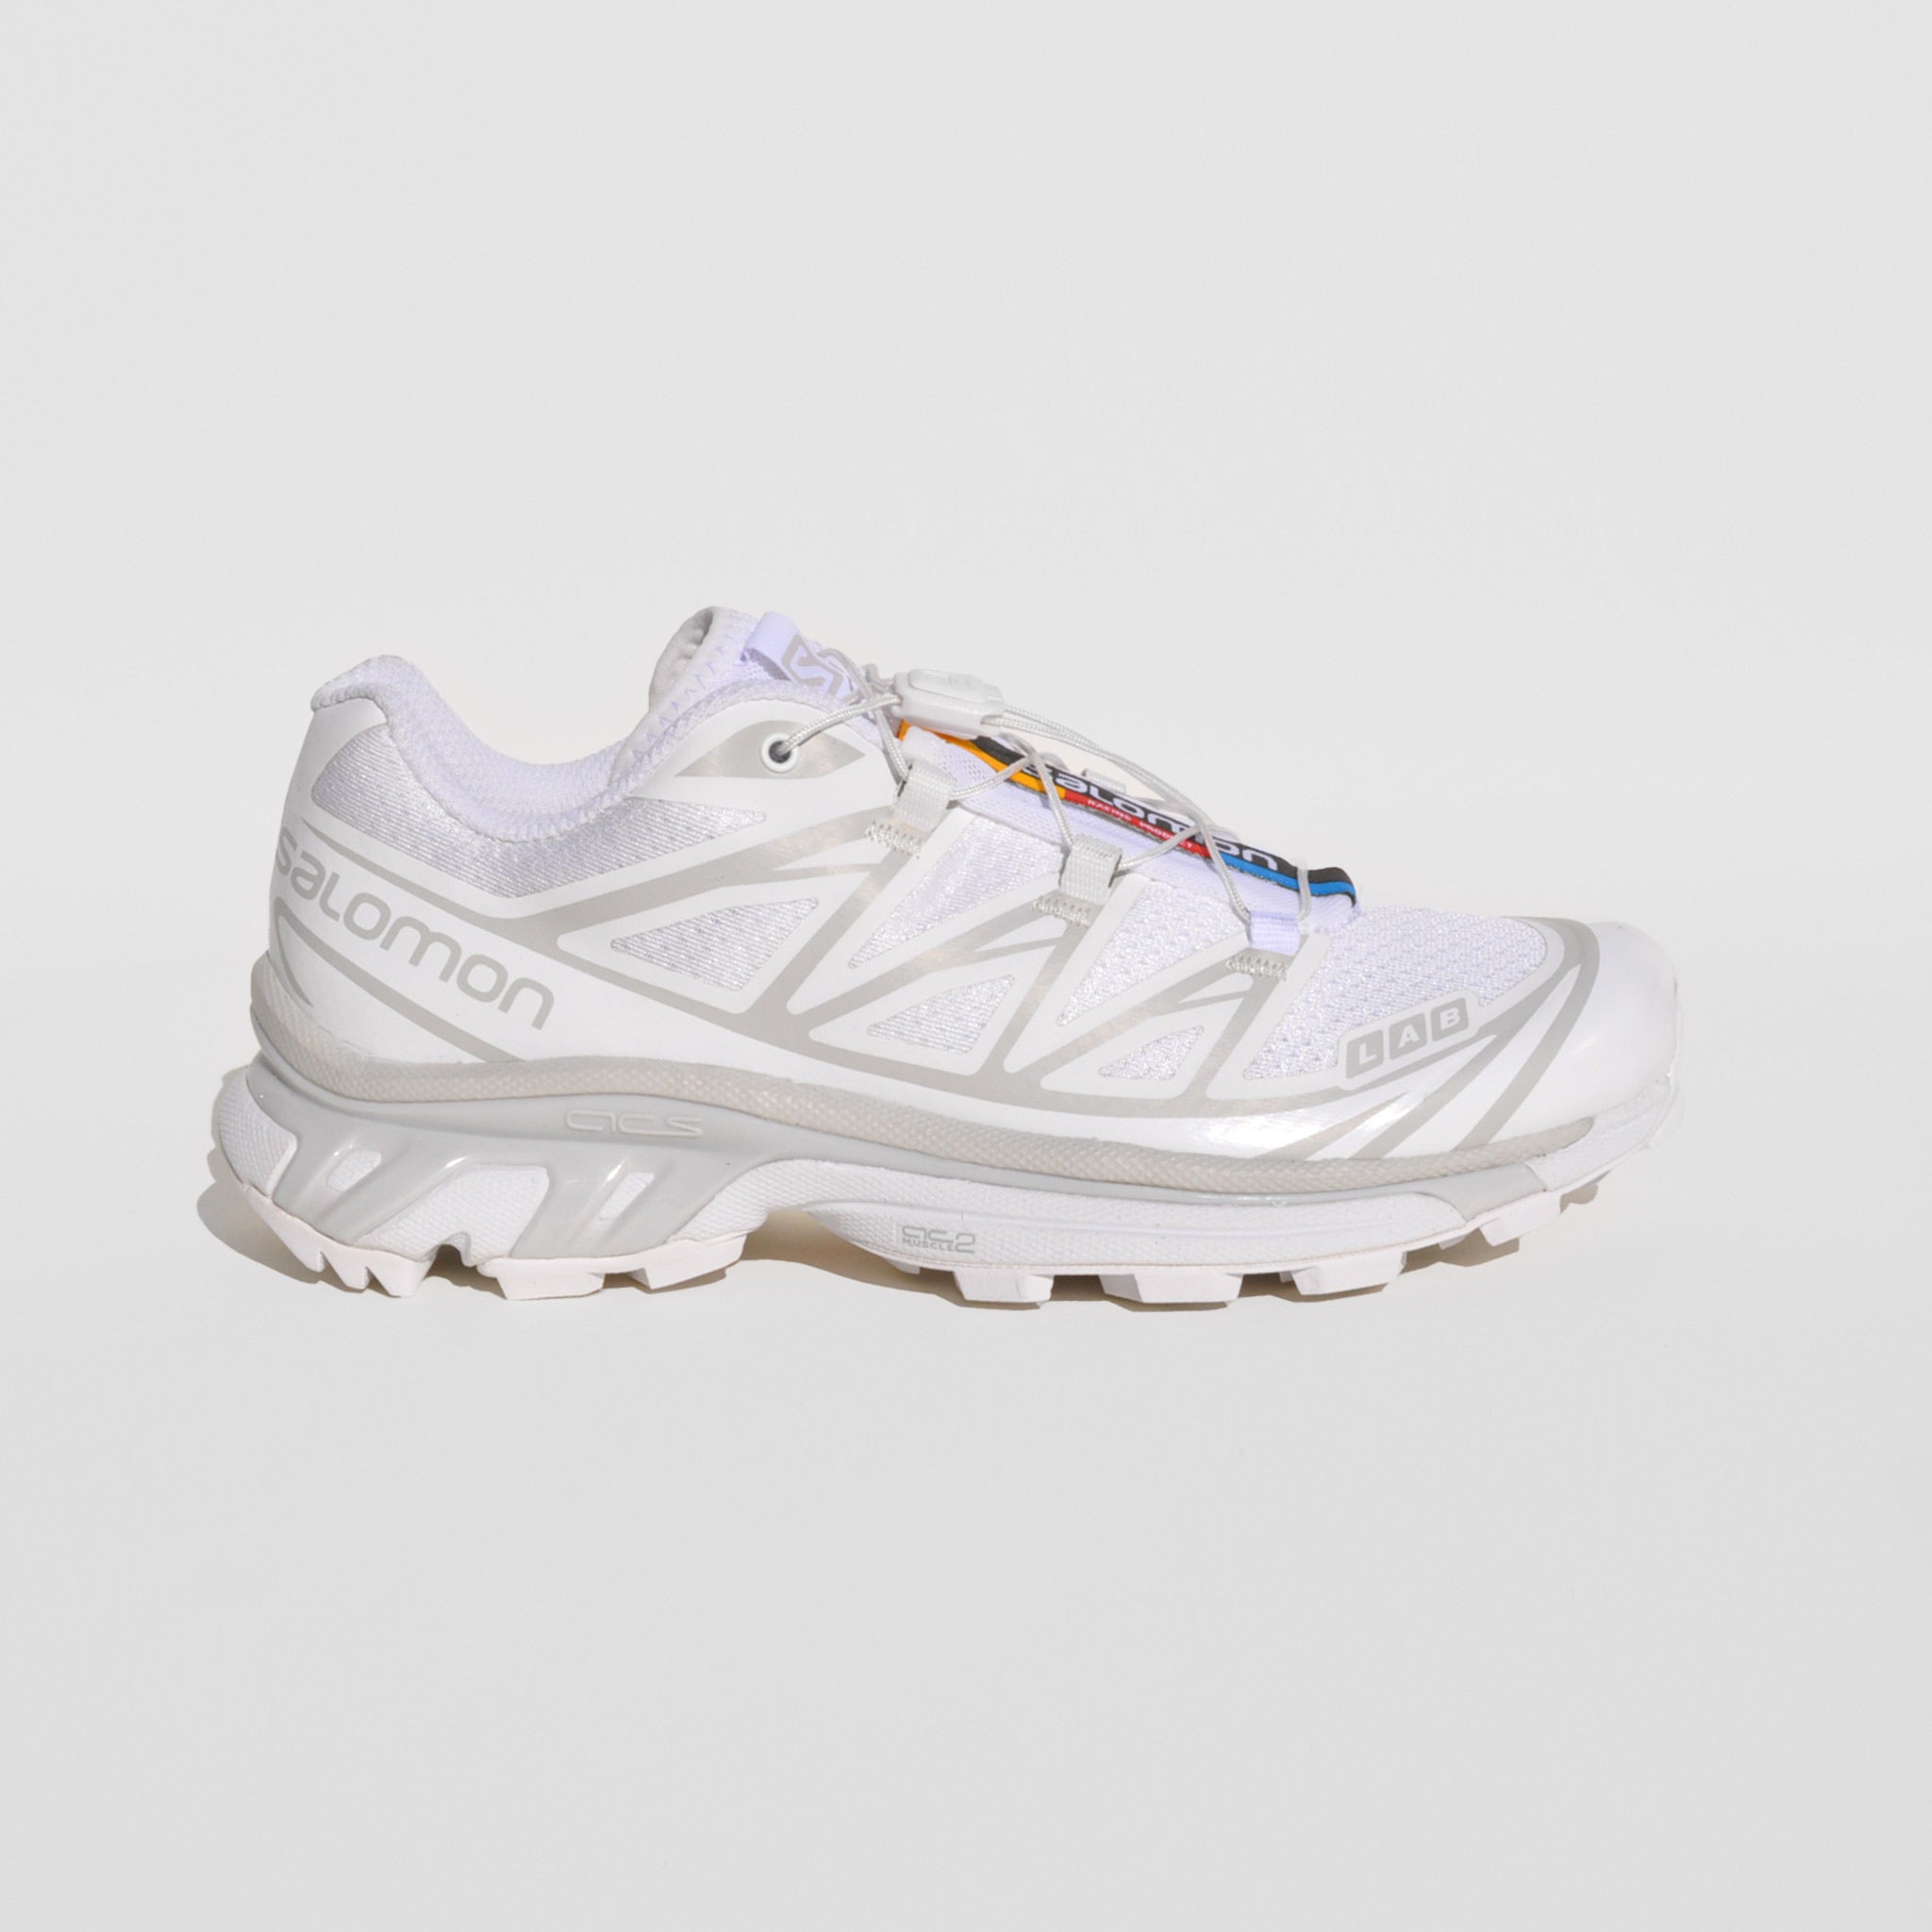 Flat image of the XT-6-white sneakers by Salmon sport style in white. These sneakers are white with their rainbow logo down the middle tongue.